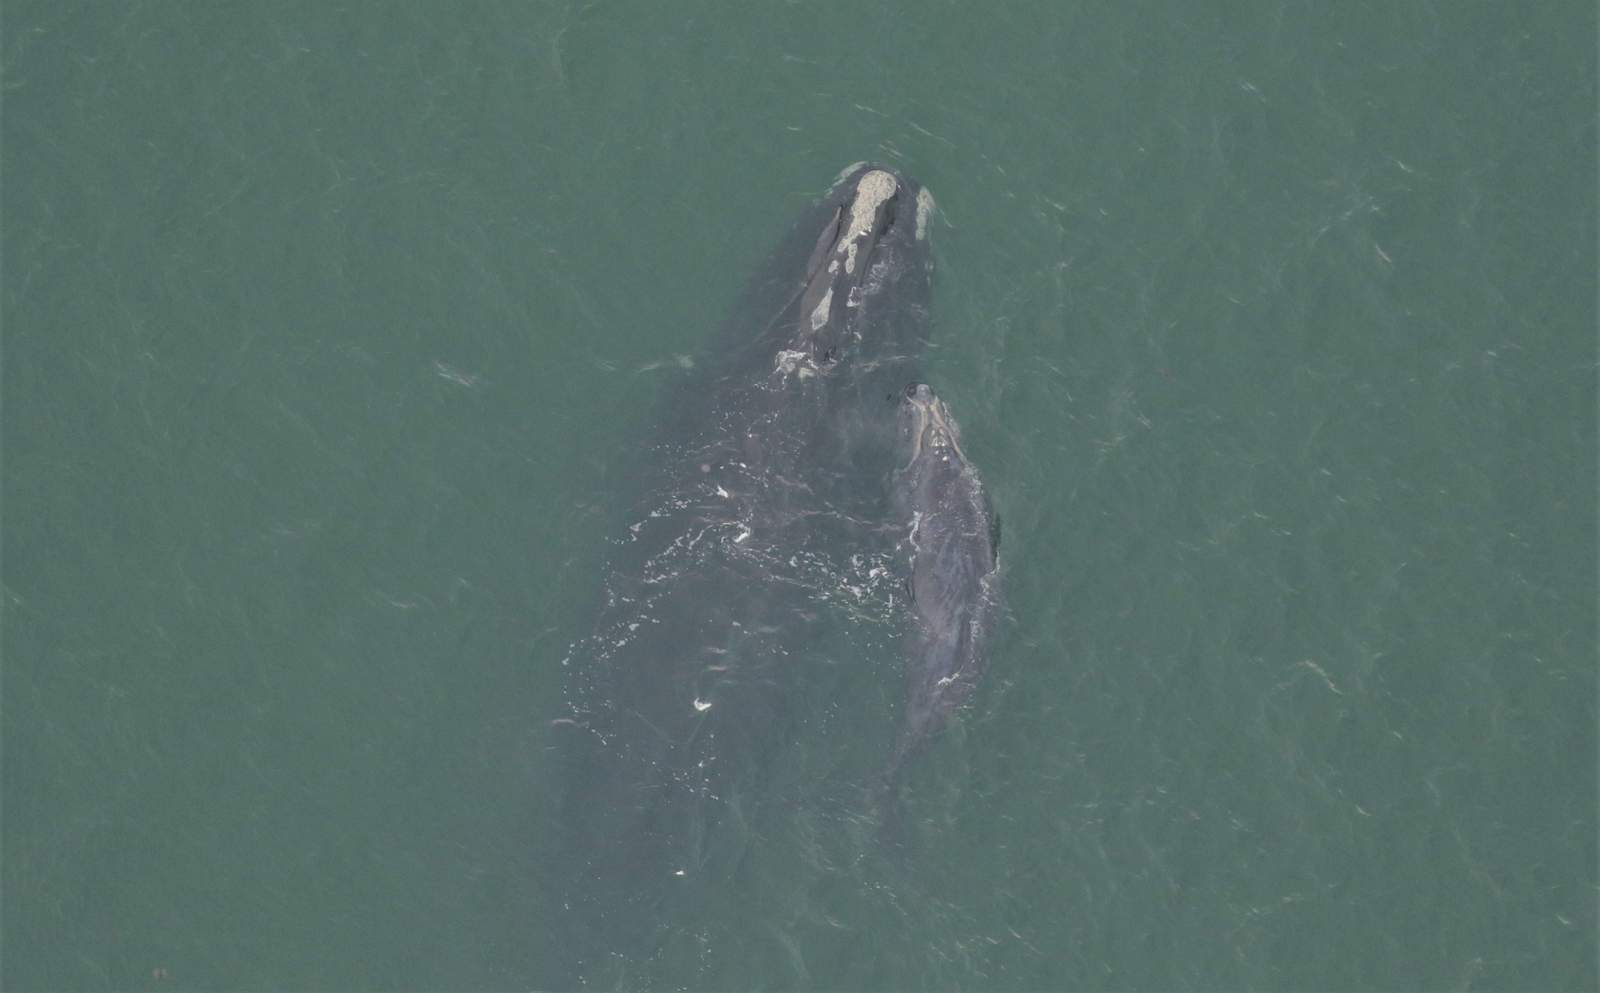 Welcoming No. 14: Another right whale calf sighted this season